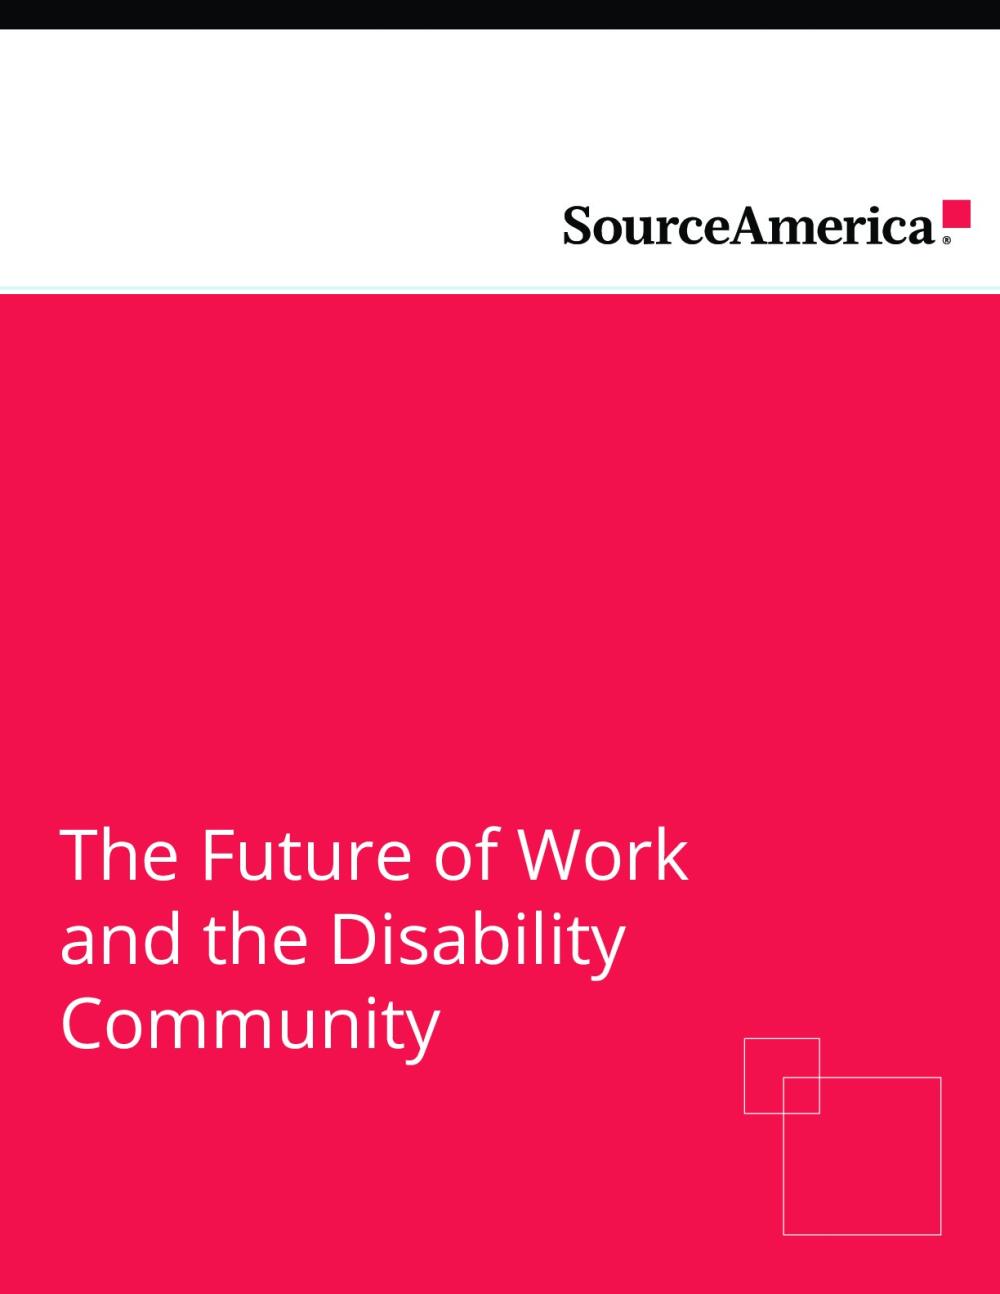 The Future of Work and the Disability Community